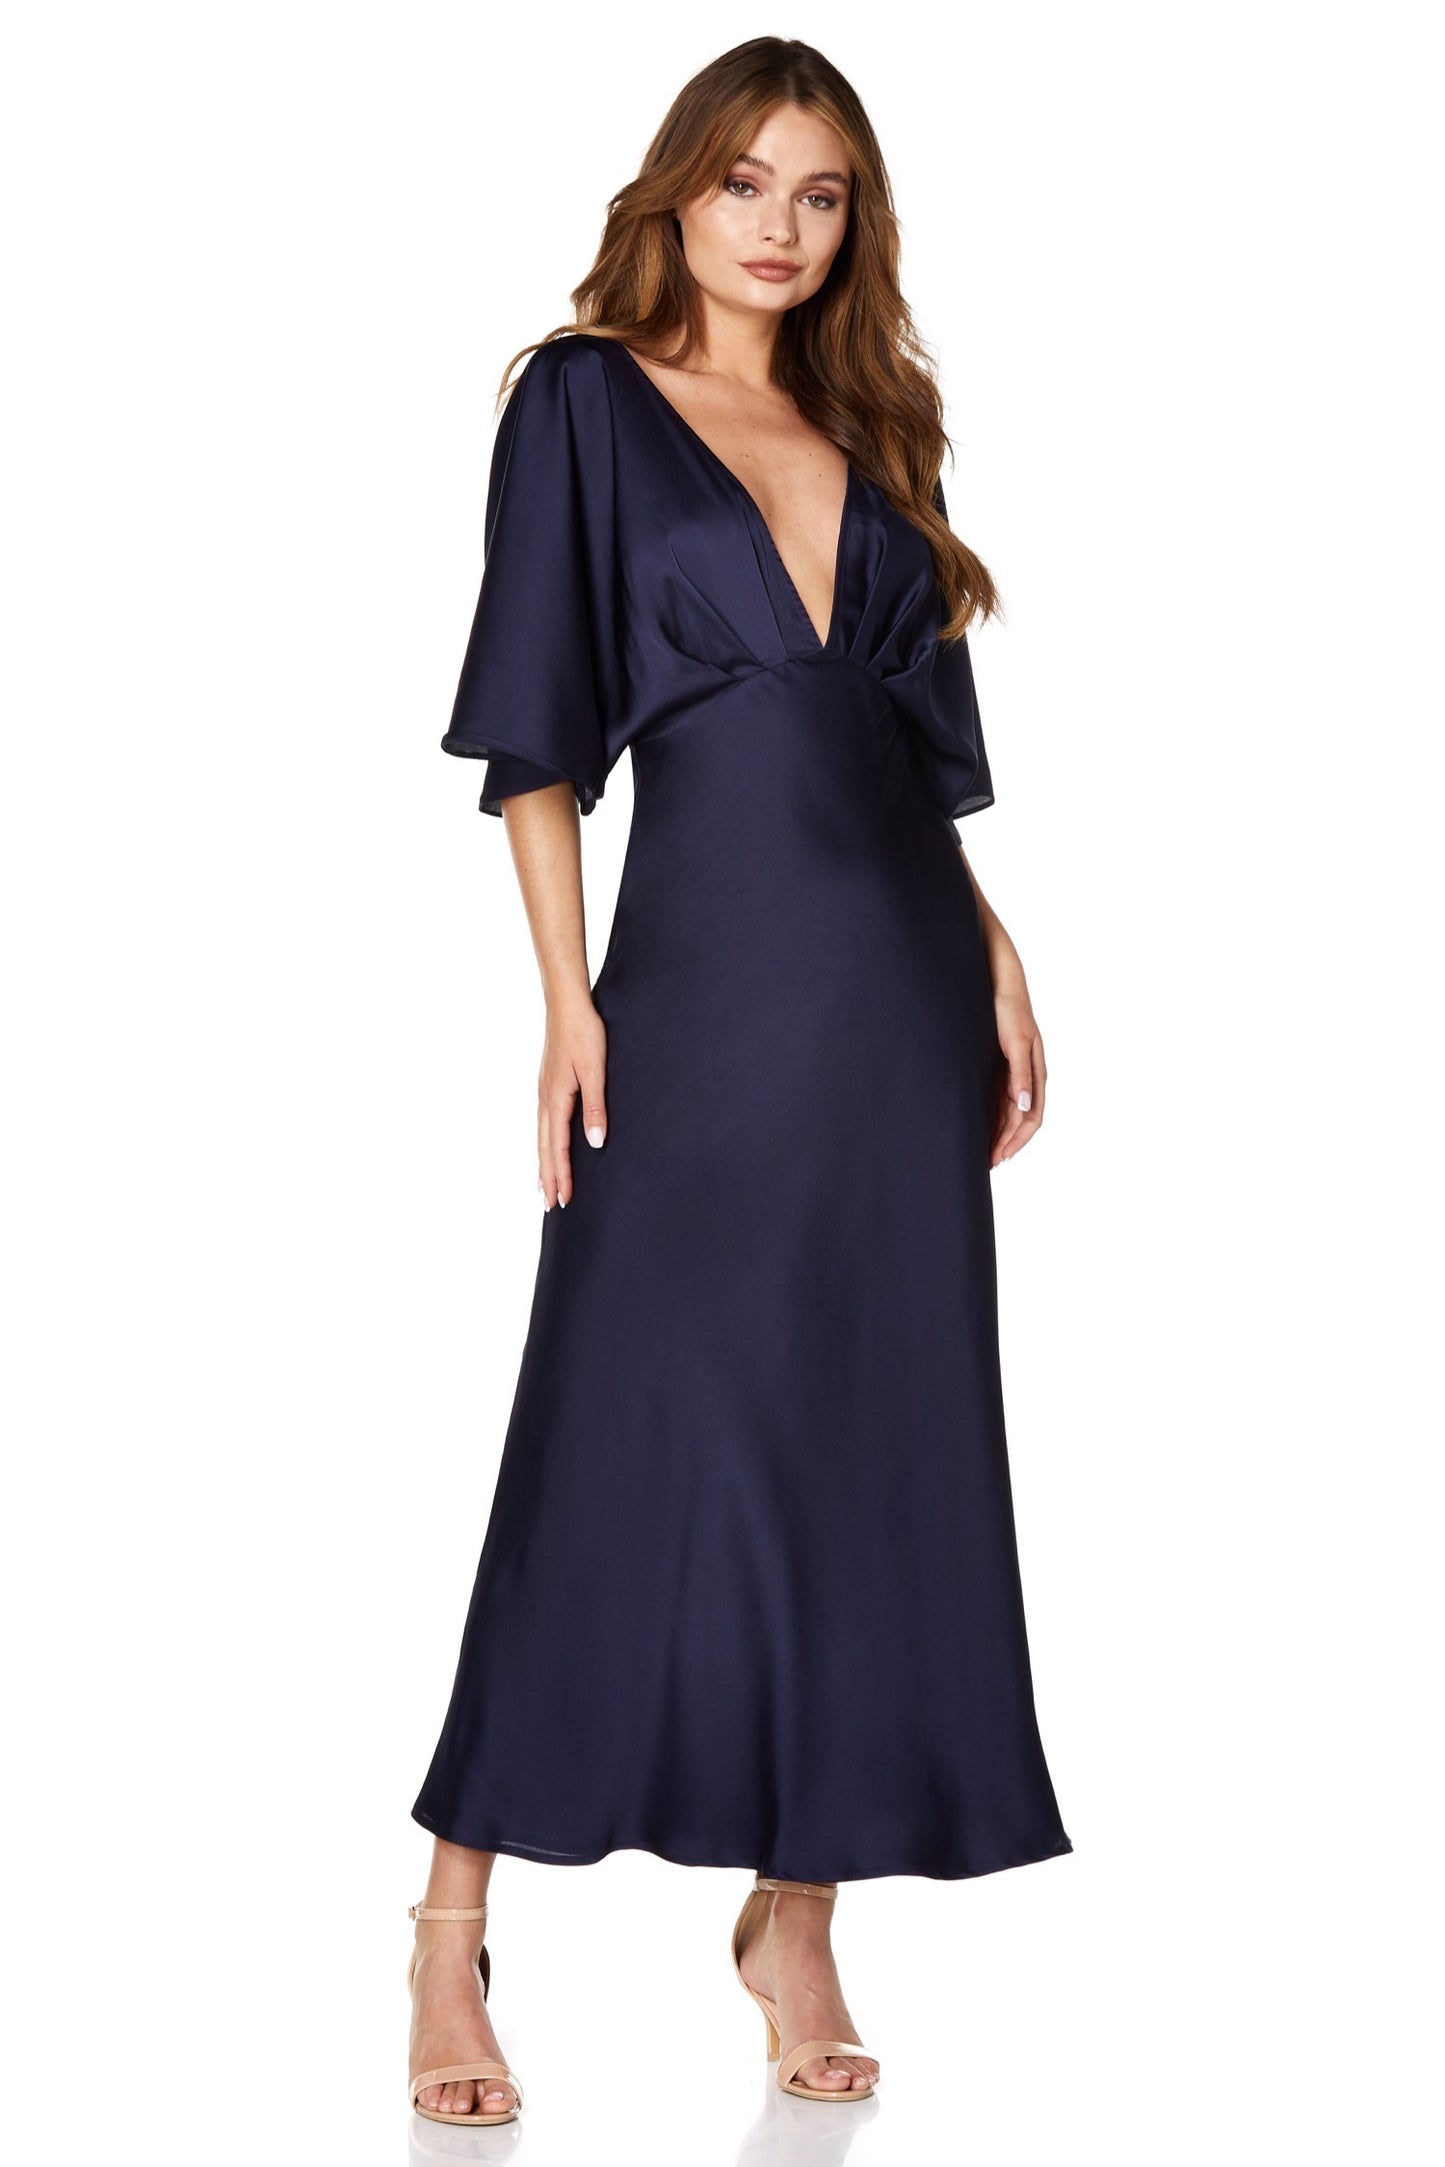 Lee Deep V Neck & Back Midi Dress with Bell Sleeves